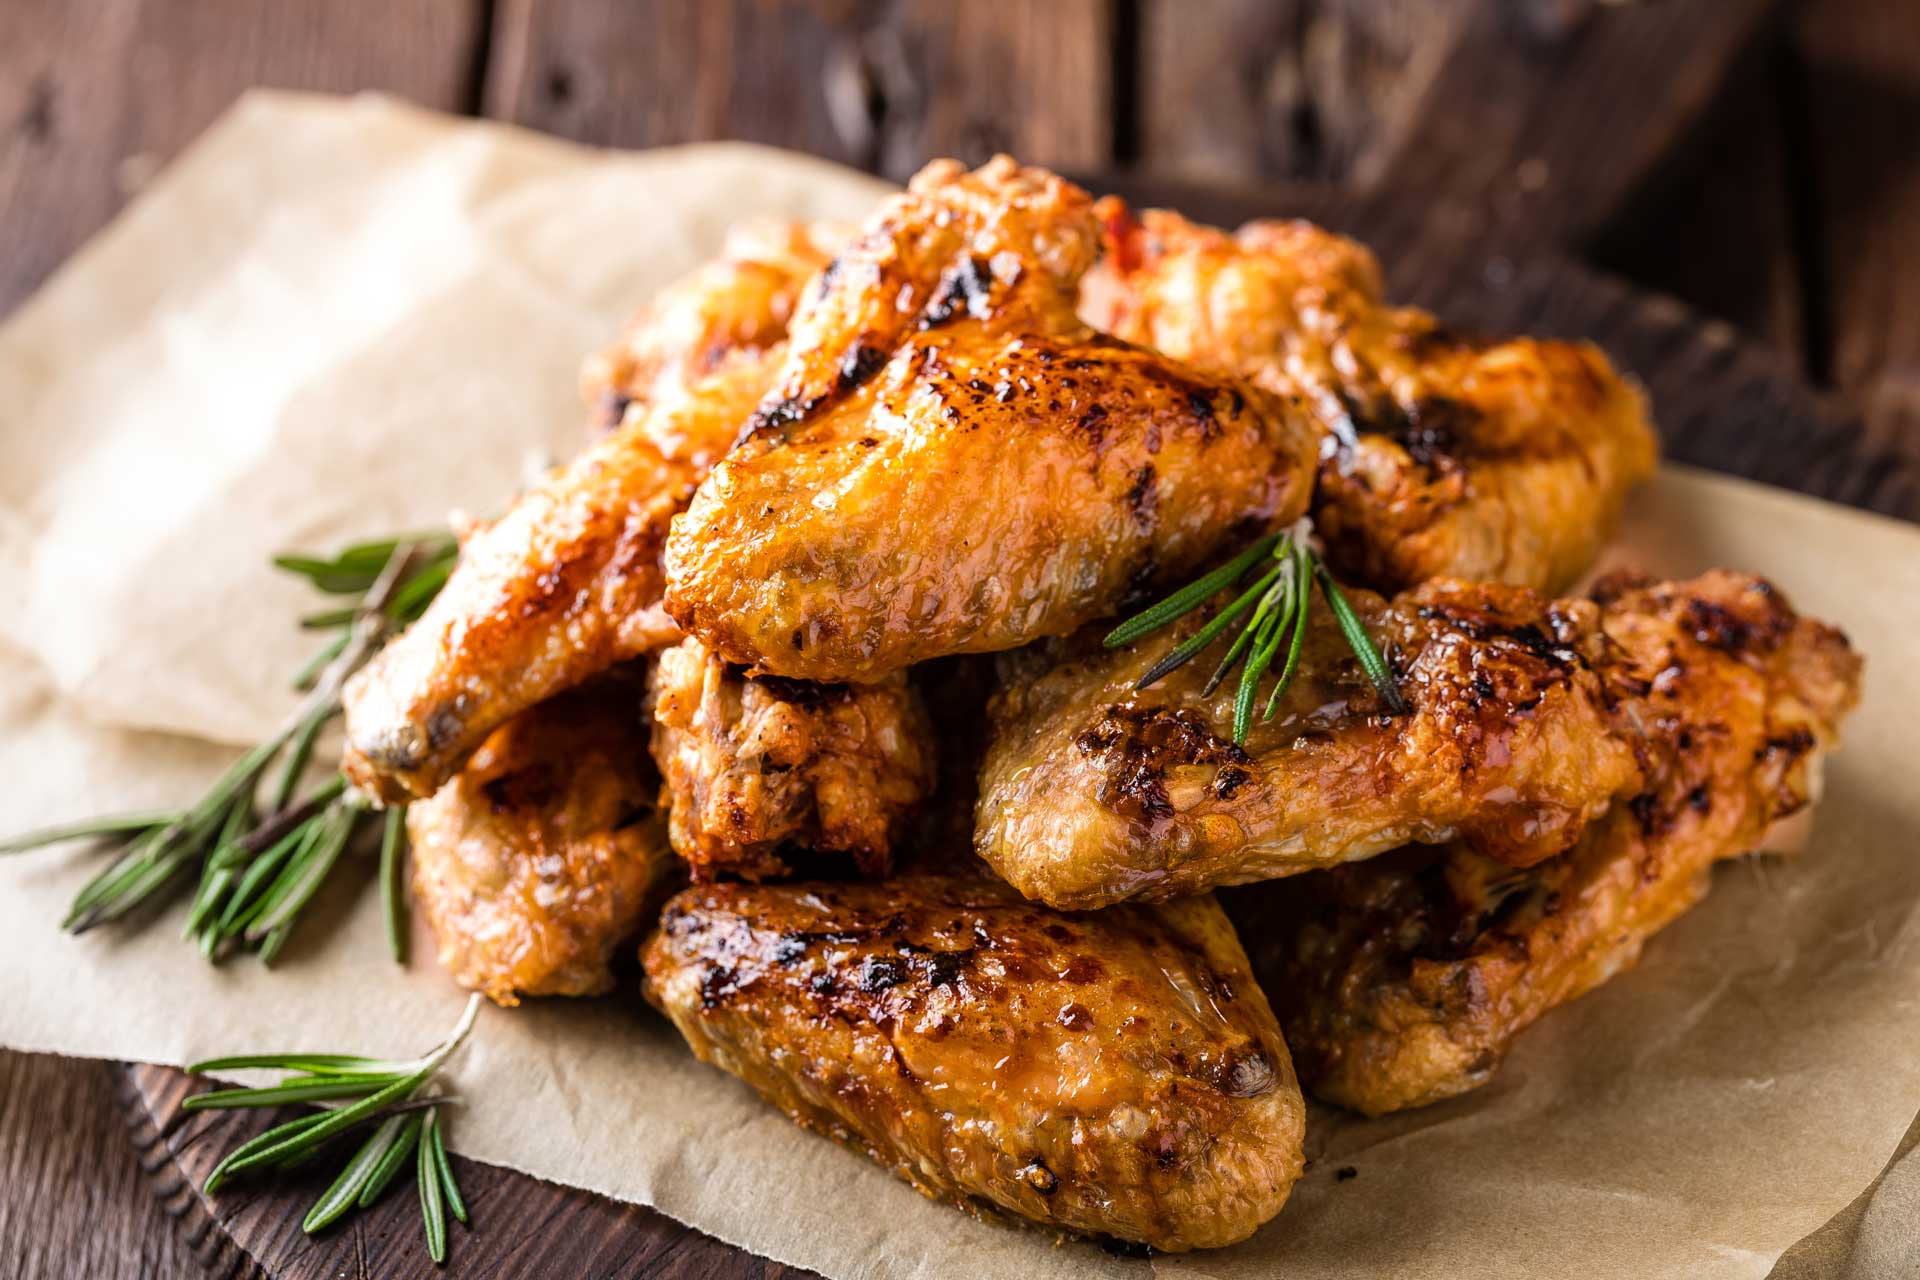 bbq-chicken-wings-spicy-grilled-meat-PEBLV2D.jpg